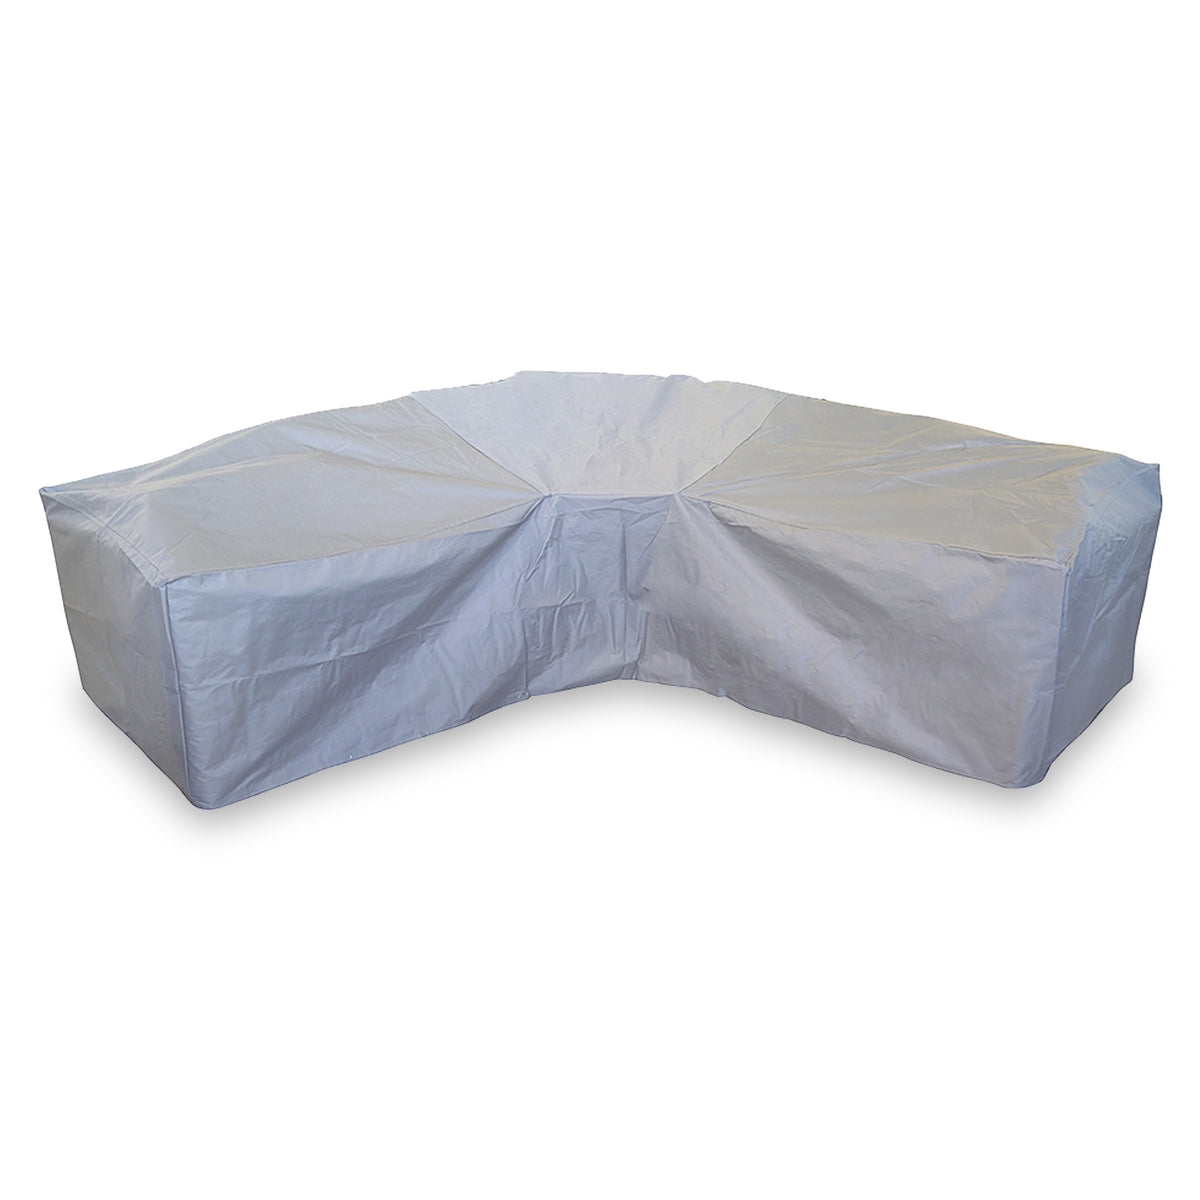 Wentworth Lounge Grey Outdoor Furniture Heavy Duty Cover